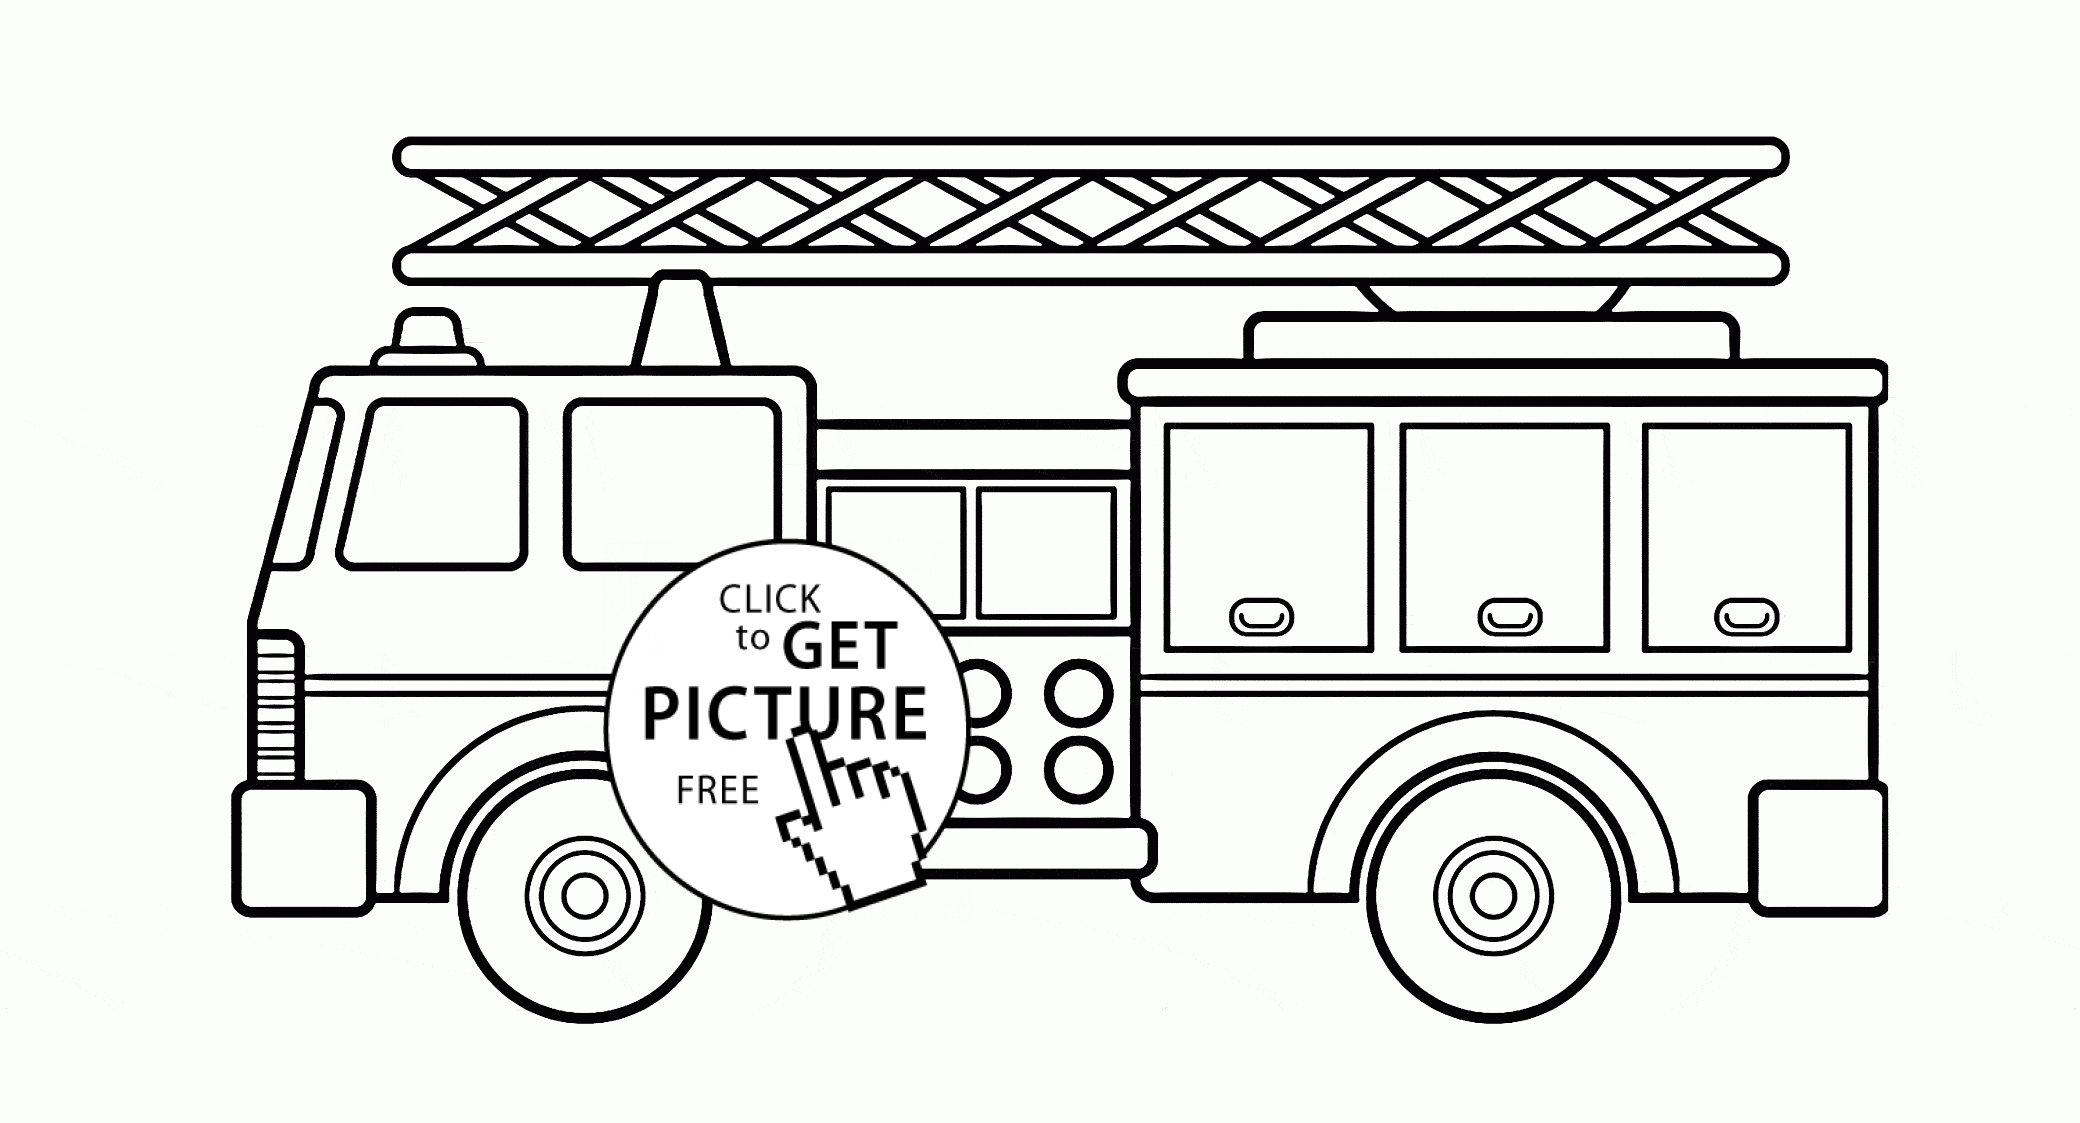 fire truck pictures coloring pages fire truck coloring pages coloring pages to download and fire truck coloring pages pictures 